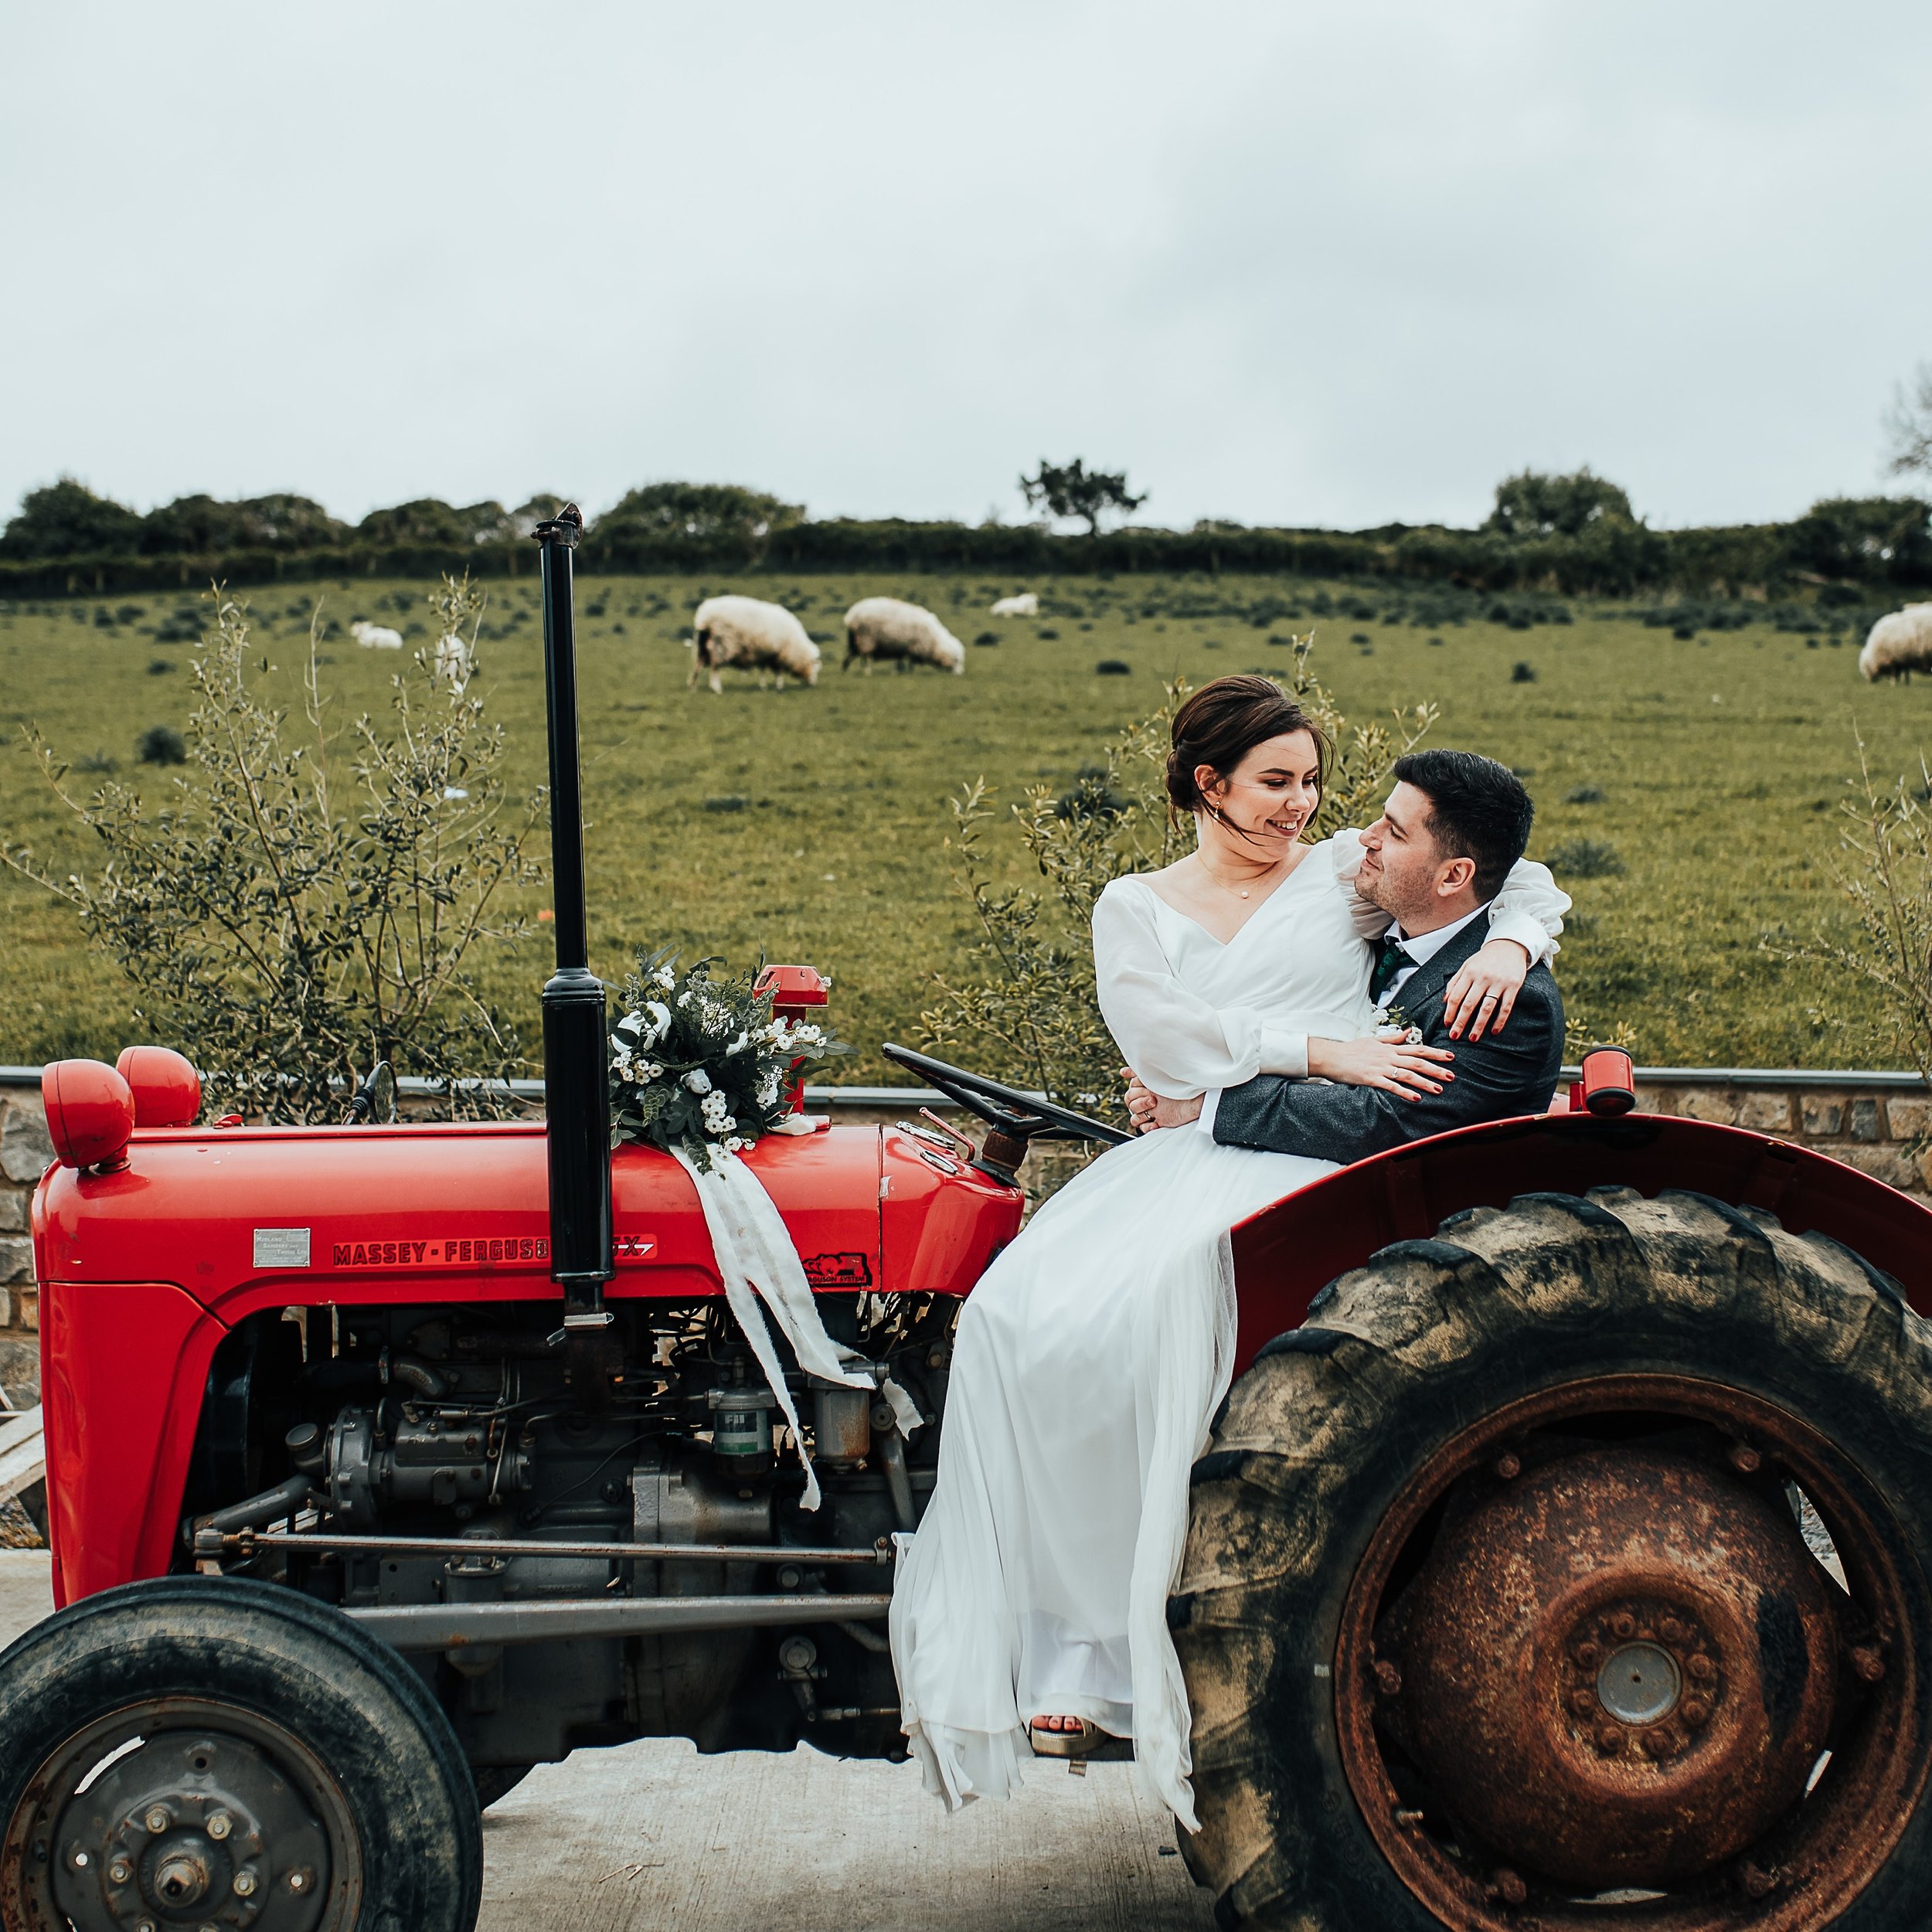 One very quick sneak peek from yesterday&rsquo;s incredible wedding at Rosedew Farm. Huge congratulations to Sophie and Jack 🥳 There will be lots more photos tomorrow so watch this space 👀

Venue: @rosedewfarm 
Hair and Make Up: @ngj_makeupandhair
